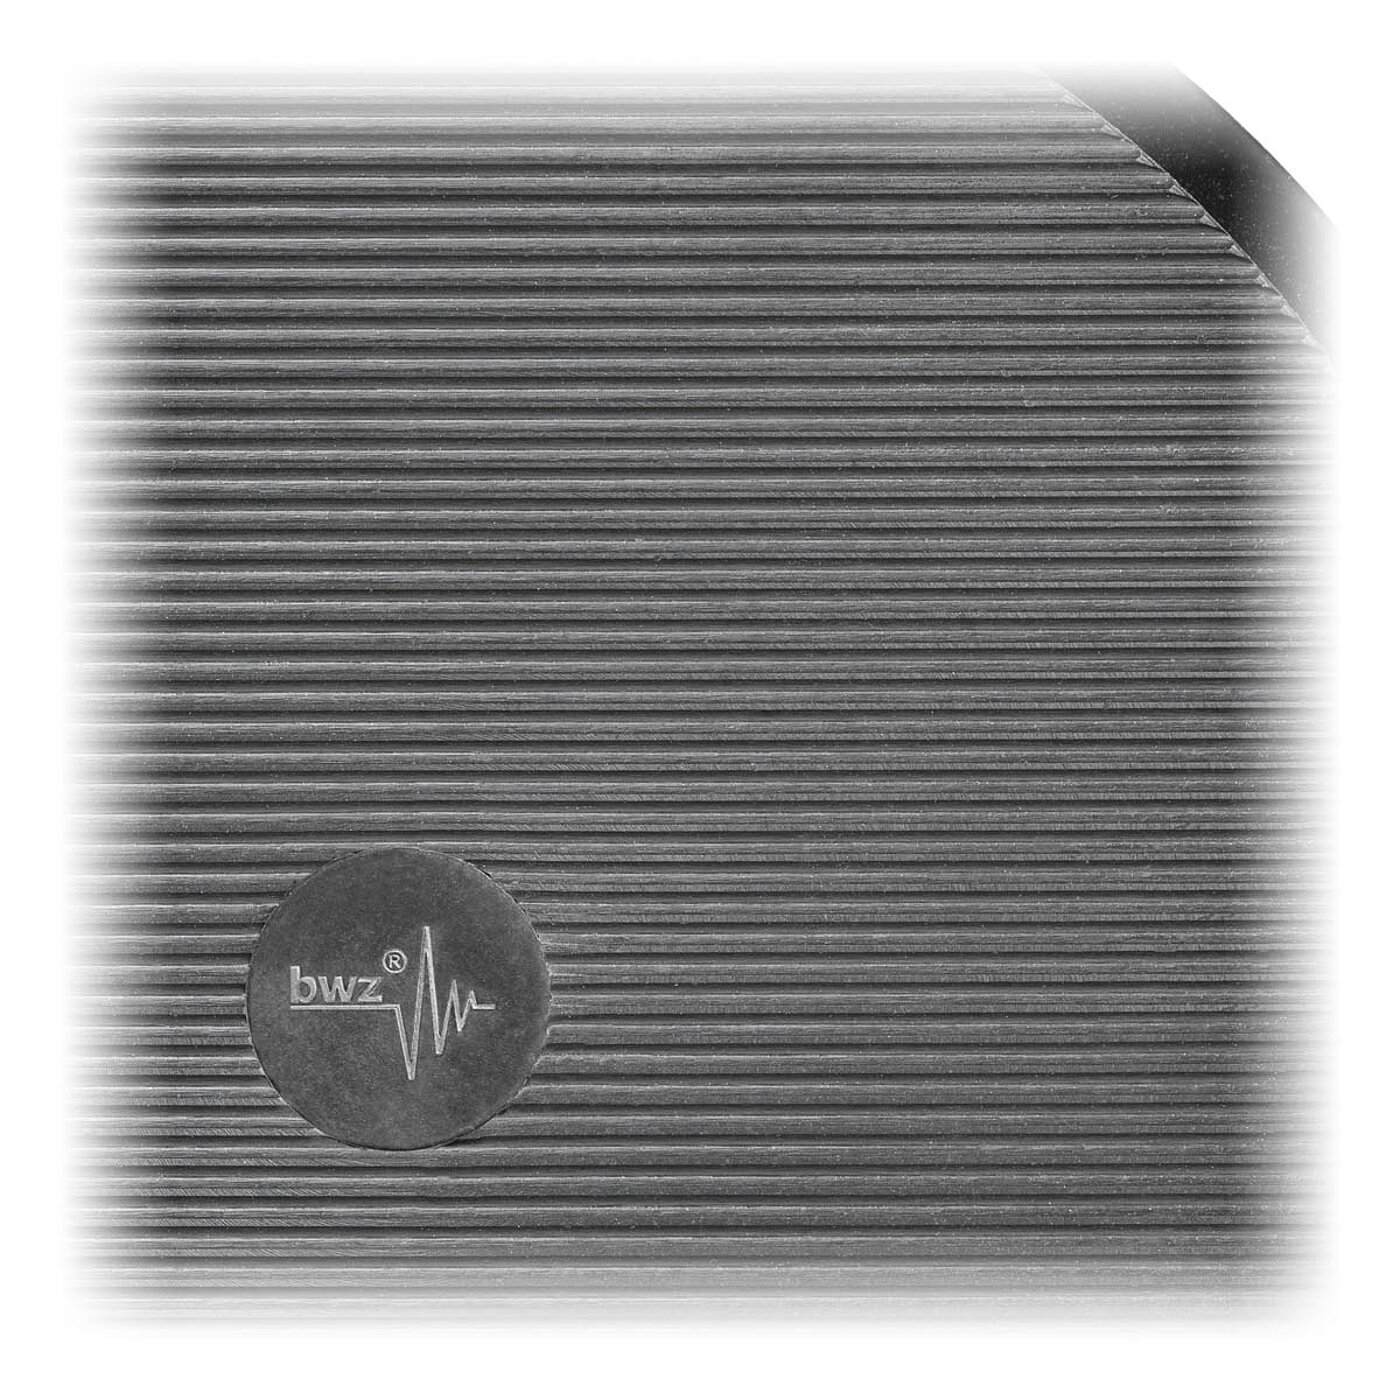 detailed view of a black elastomer made of nitrile rubber NBR for non-slip protection, with fine horizontal grooved lines and logo of the company 'bwz Schwingungstechnik', isolated on white background